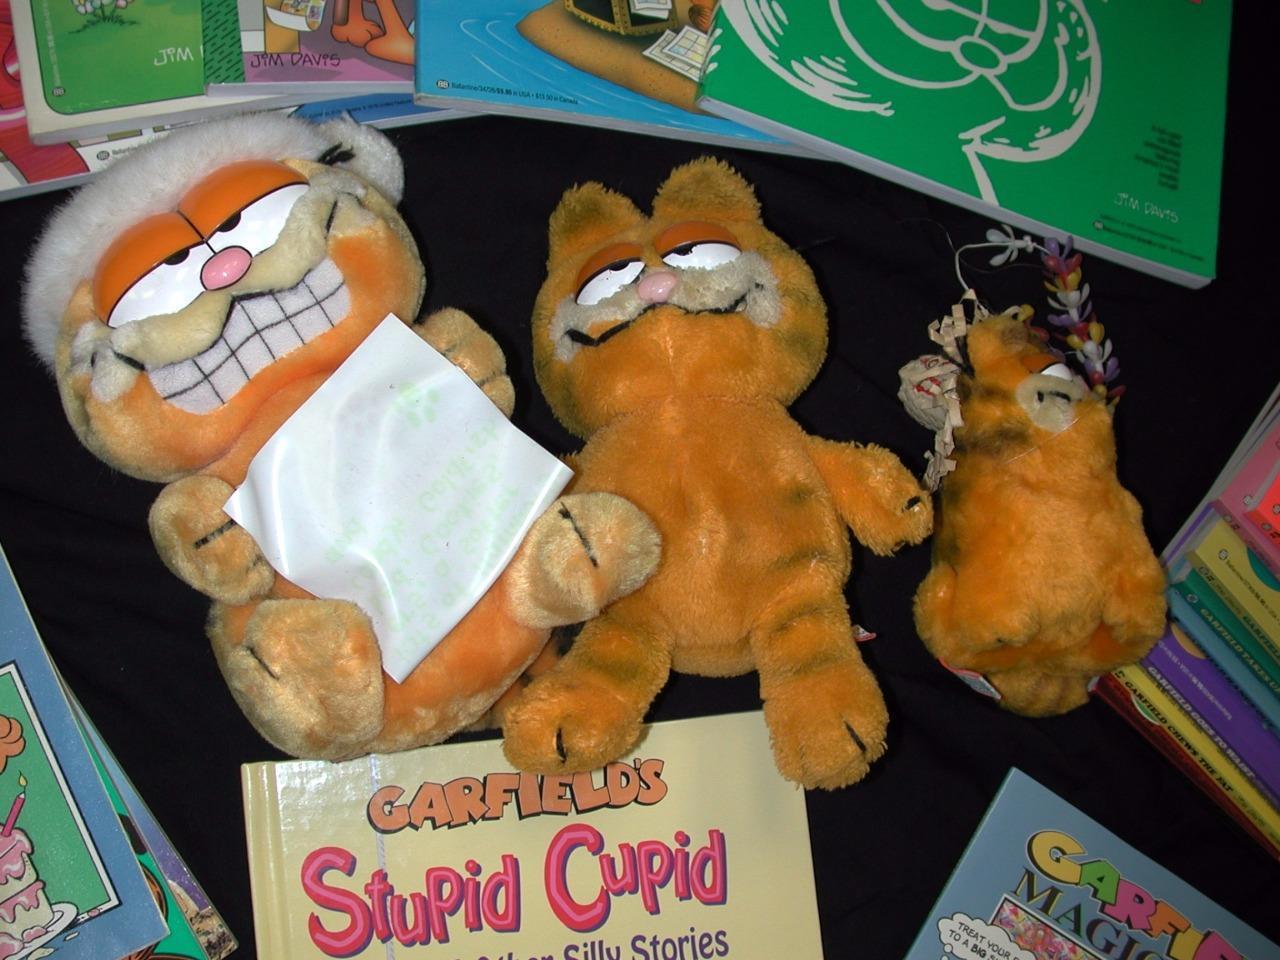 Garfield Collection 24 items from 1980s 1990s books stuffed Garfields